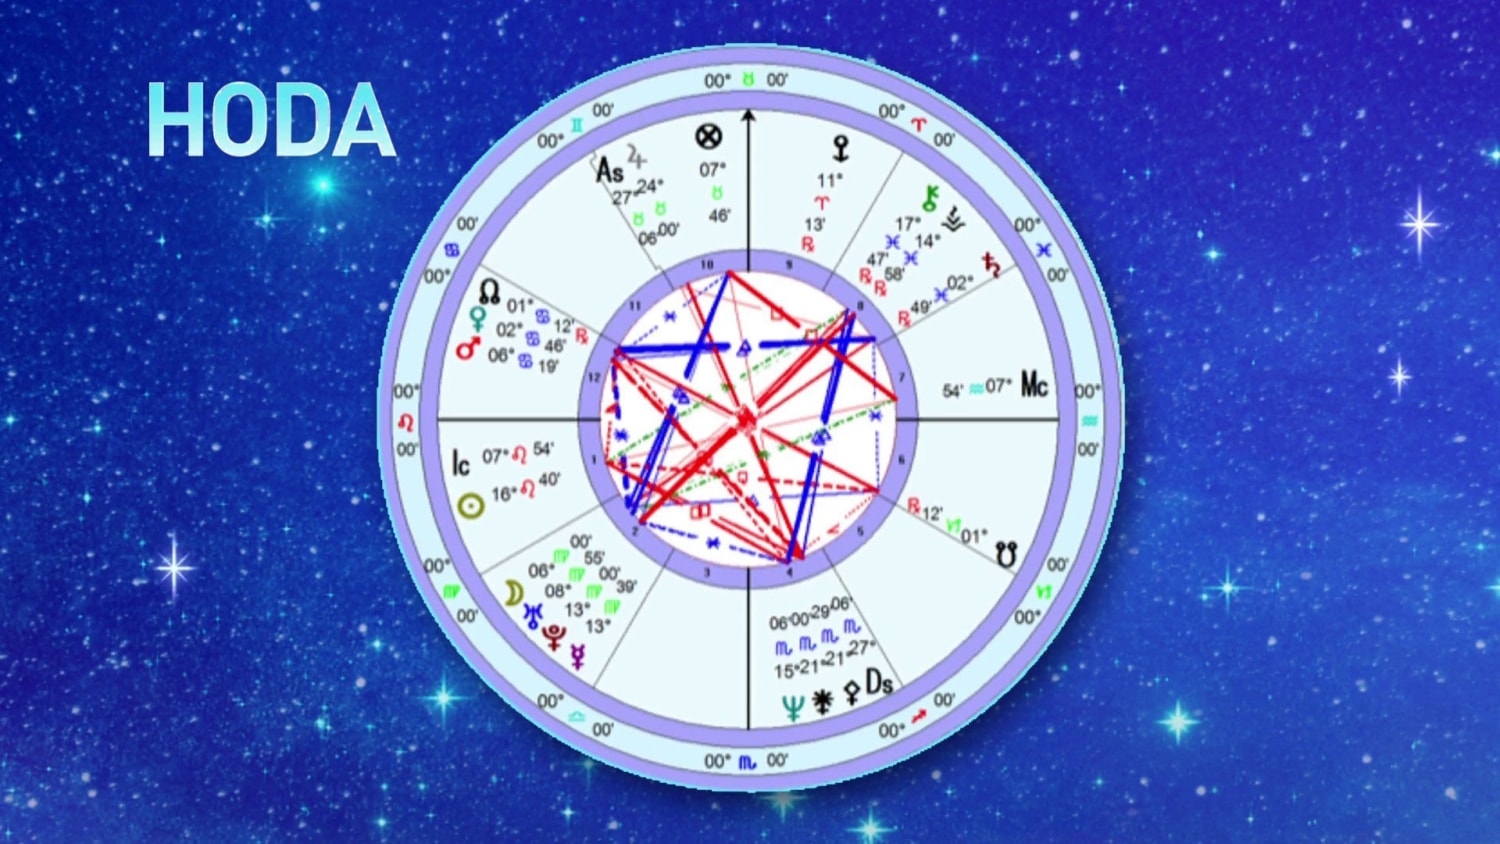 new moon march 2019 astrology king